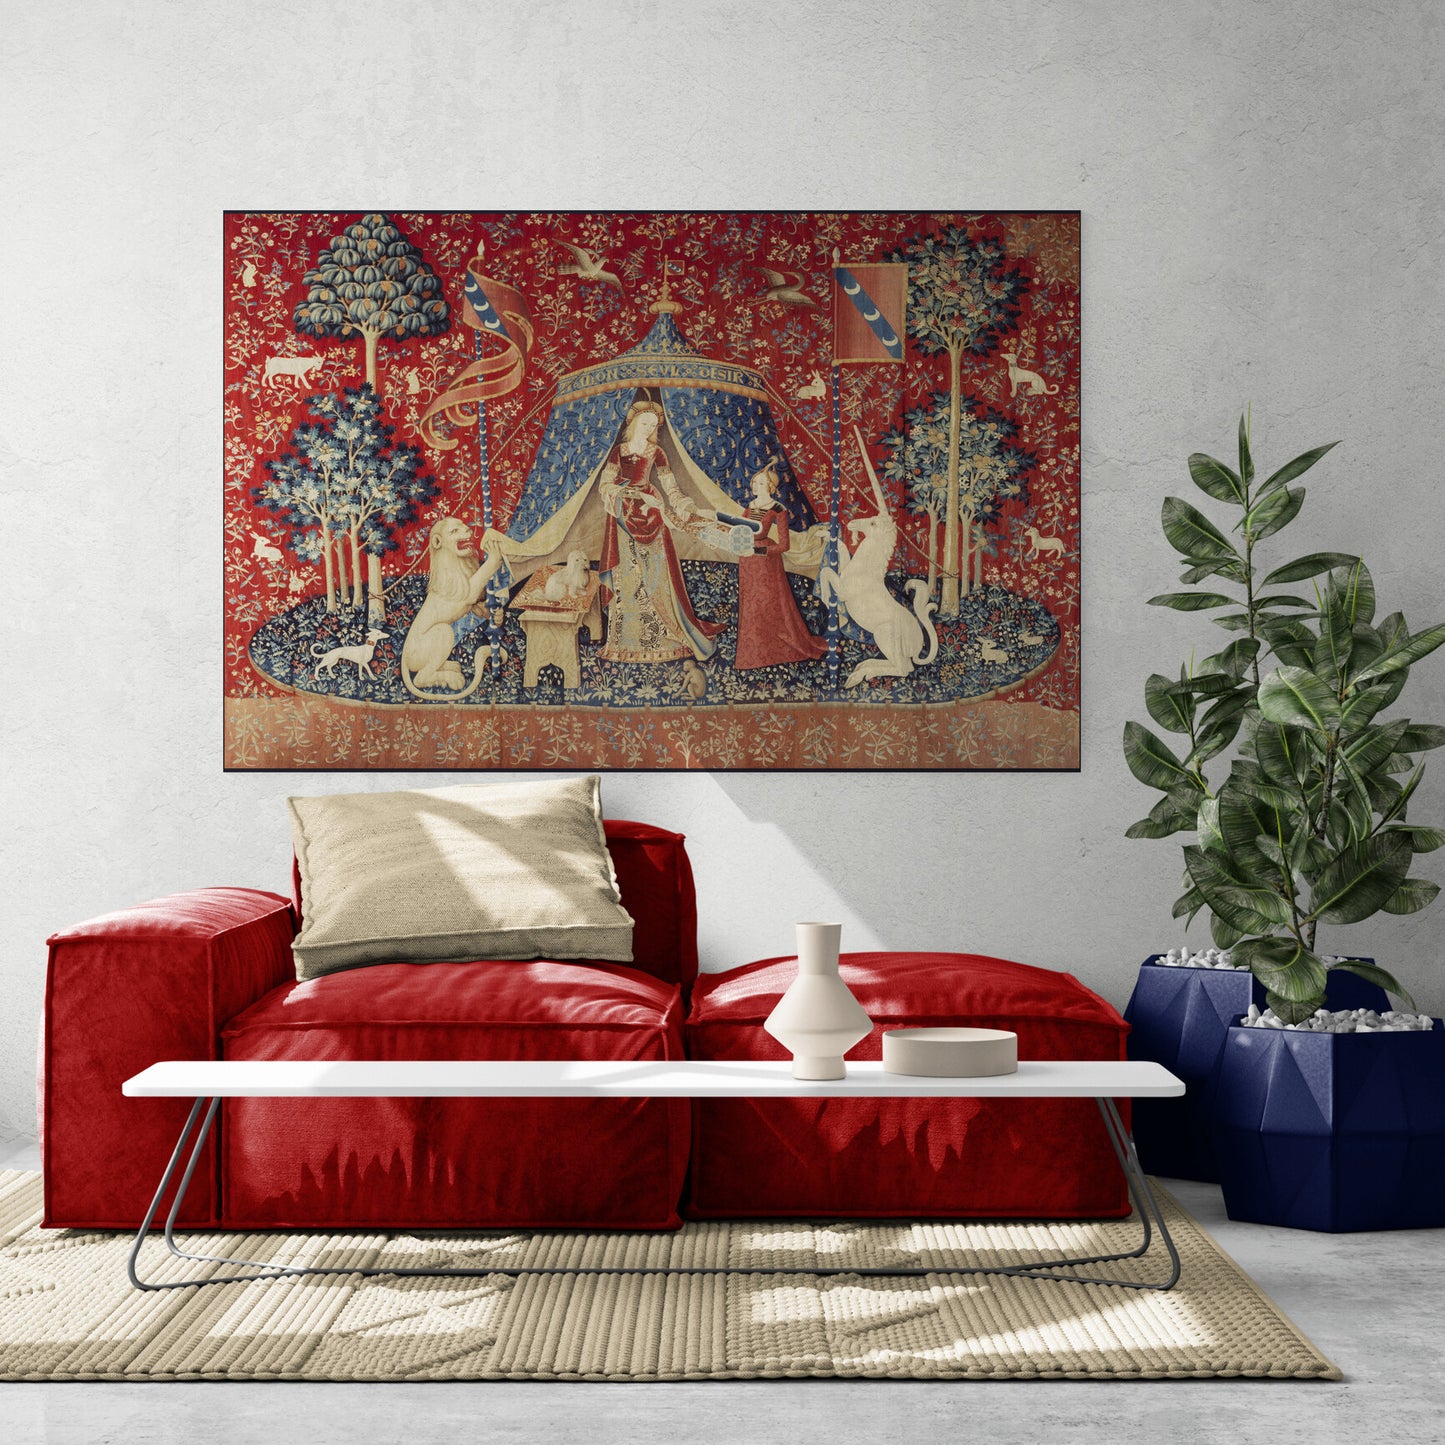 Medieval Tapestry Fabric Print of The Lady and the Unicorn La Dame à la licorne Mon Sol Desir "Desire" The Mona Lisa of the Middle Ages RE777978